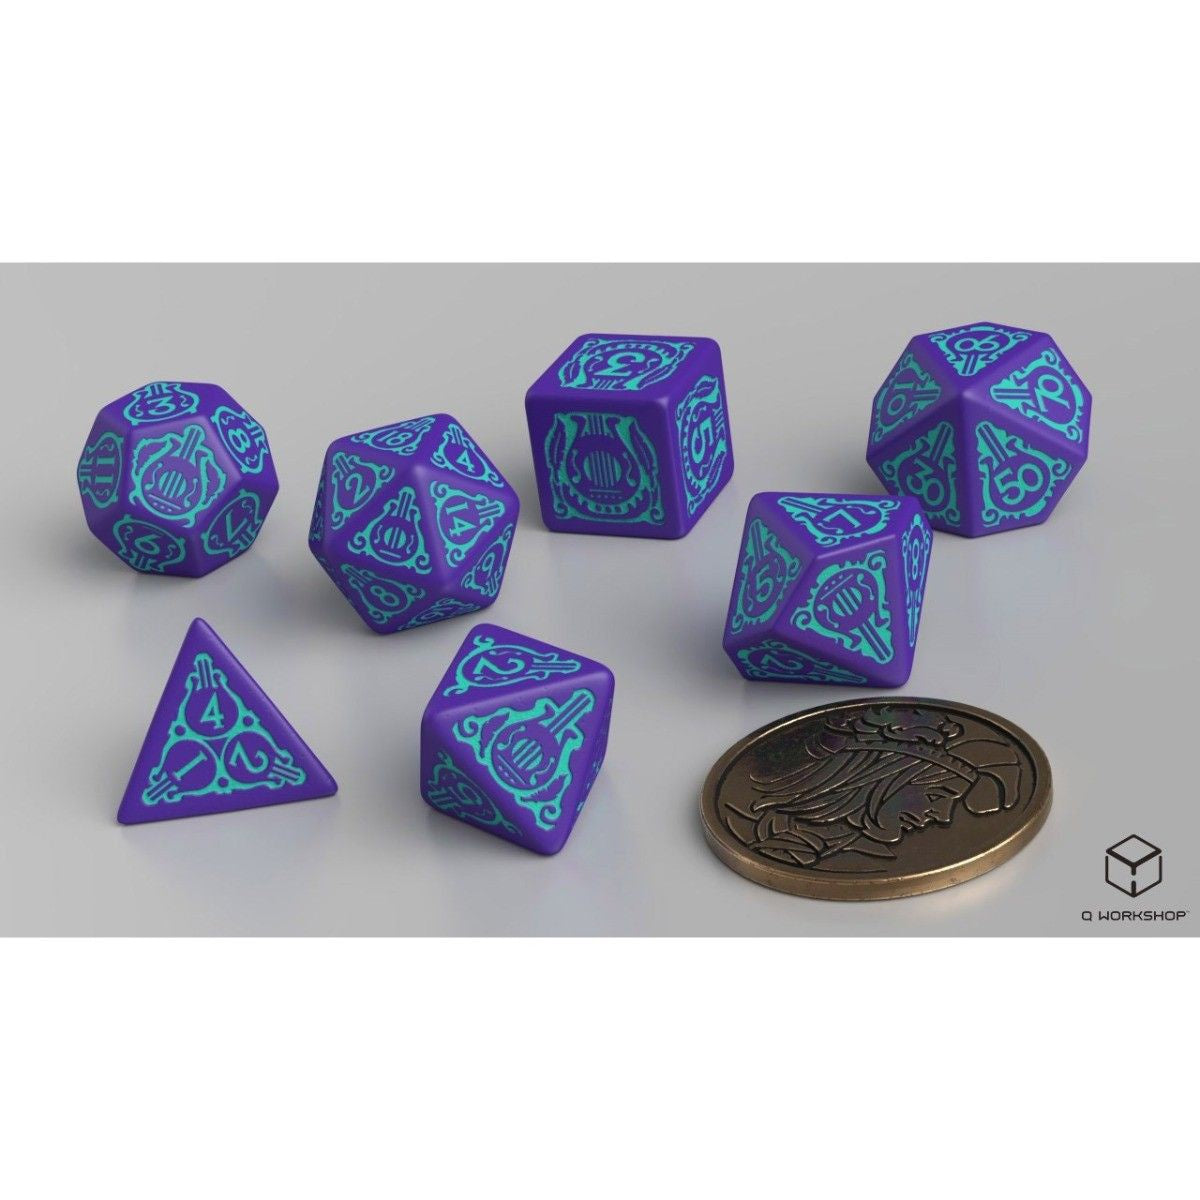 Q Workshop - The Witcher Dice - Dandelion Half Century of Poetry with Coin